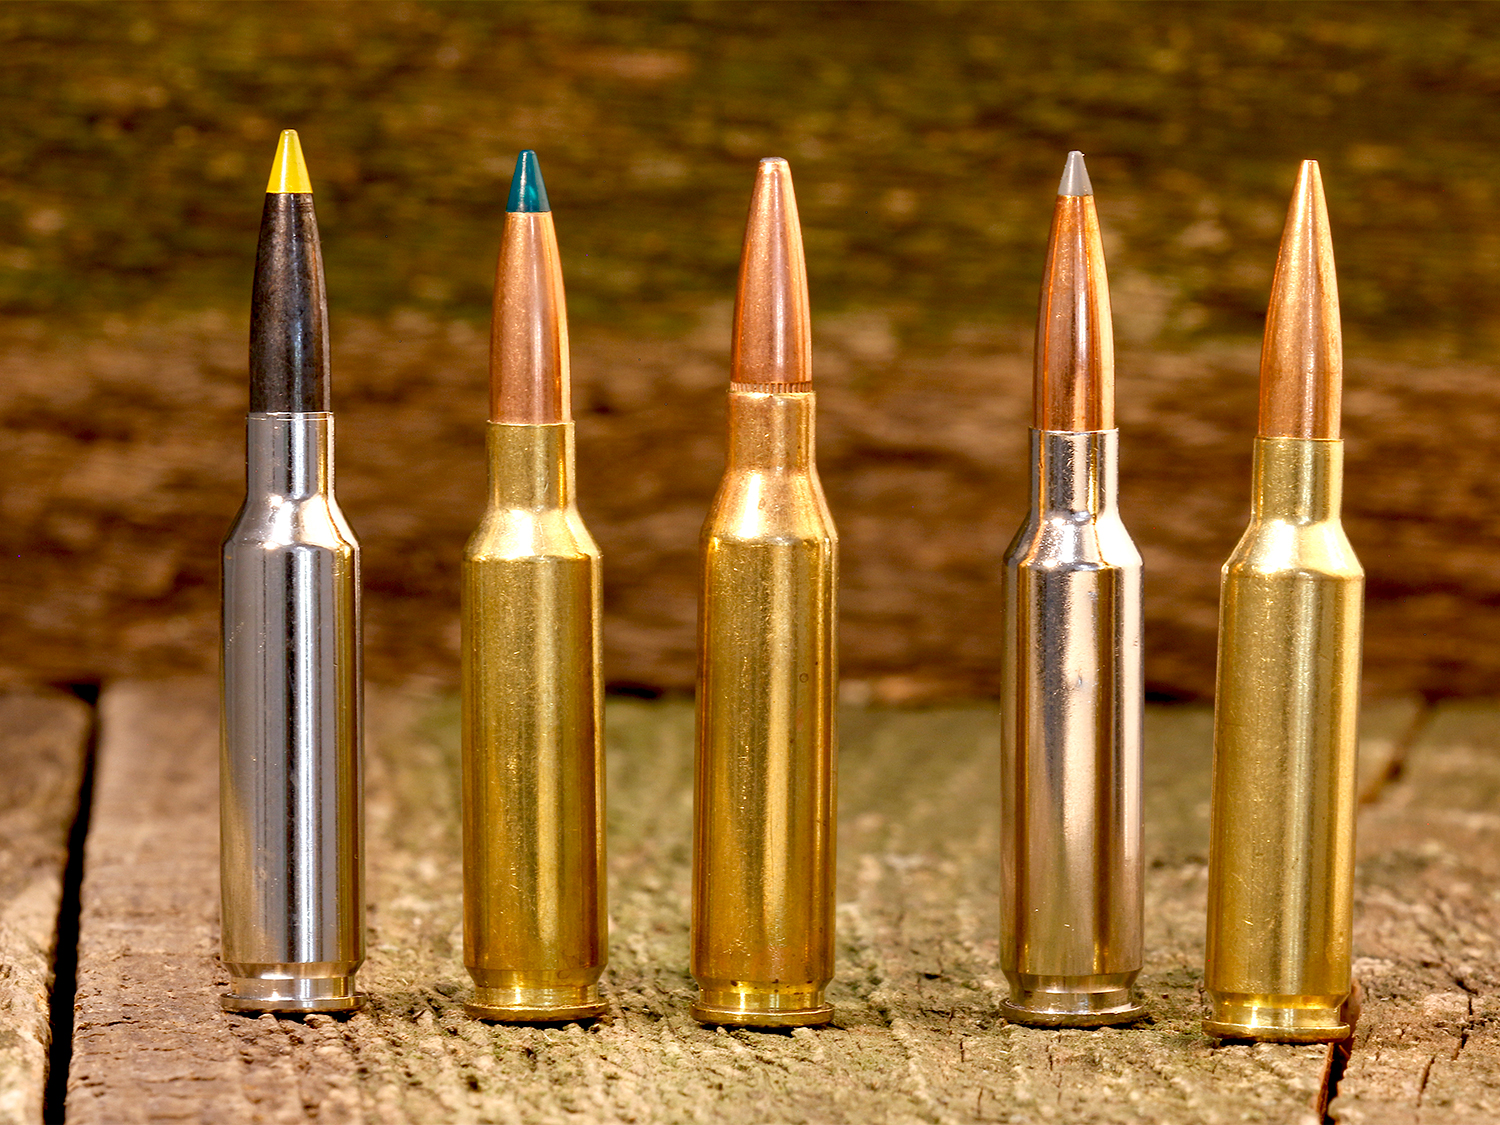 A lineup of rifle ammunition on a wooden table.